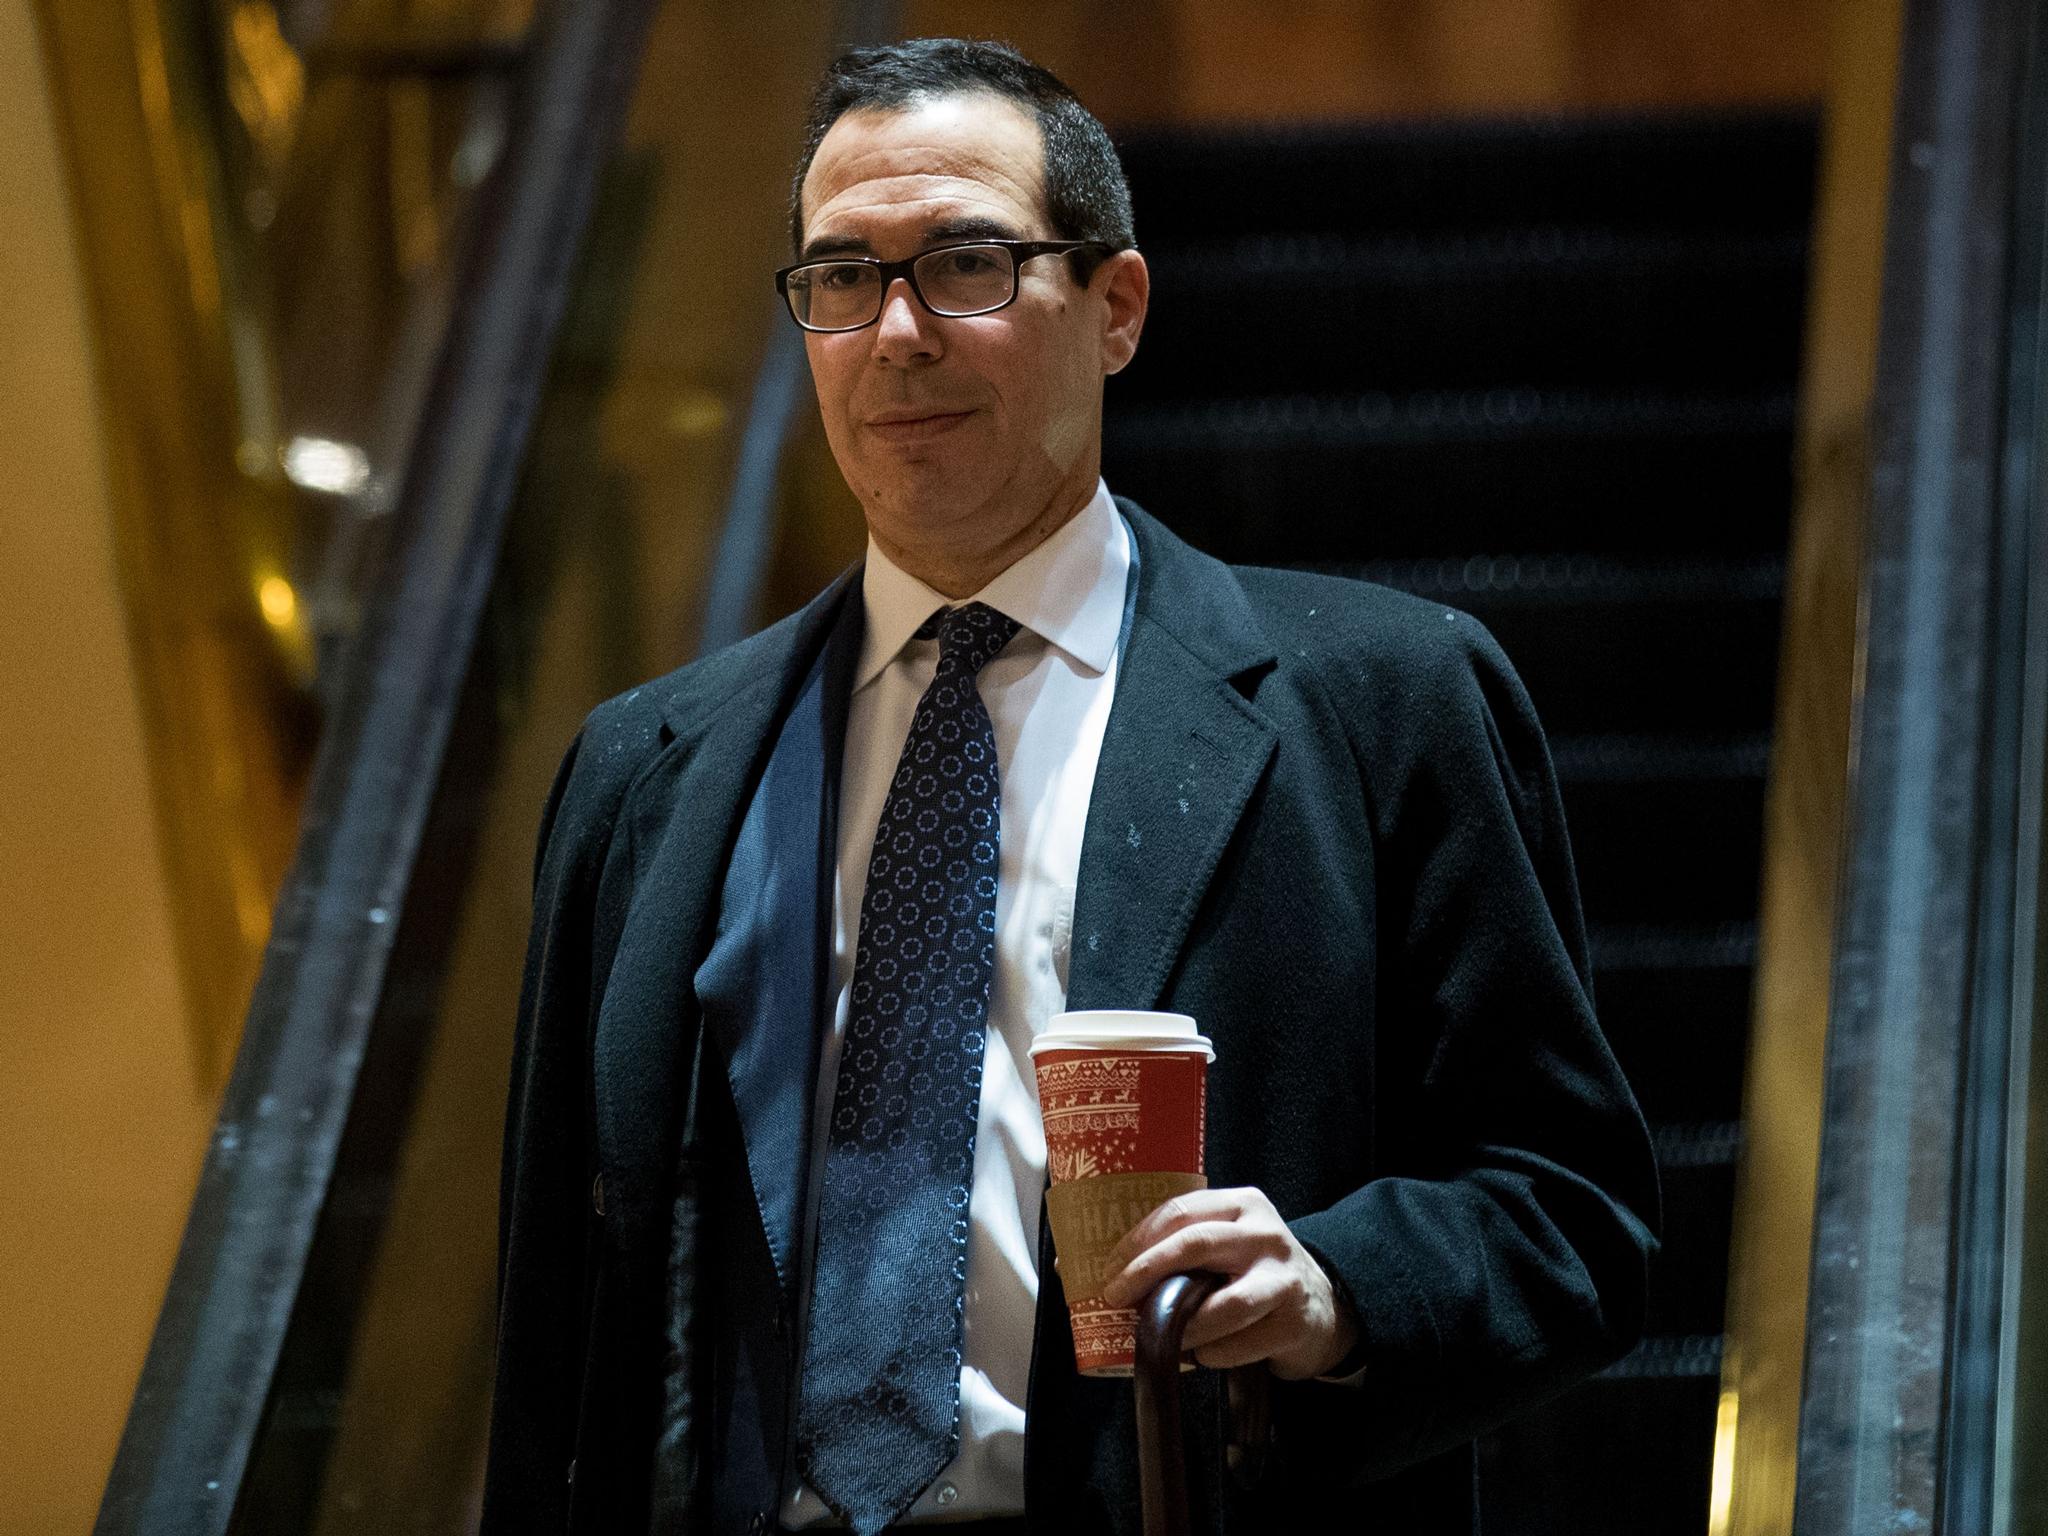 Steven Mnuchin said that the prospect of getting major tax reforms through Congress and signed off ahead of August was 'highly aggressive to not realistic at this point'